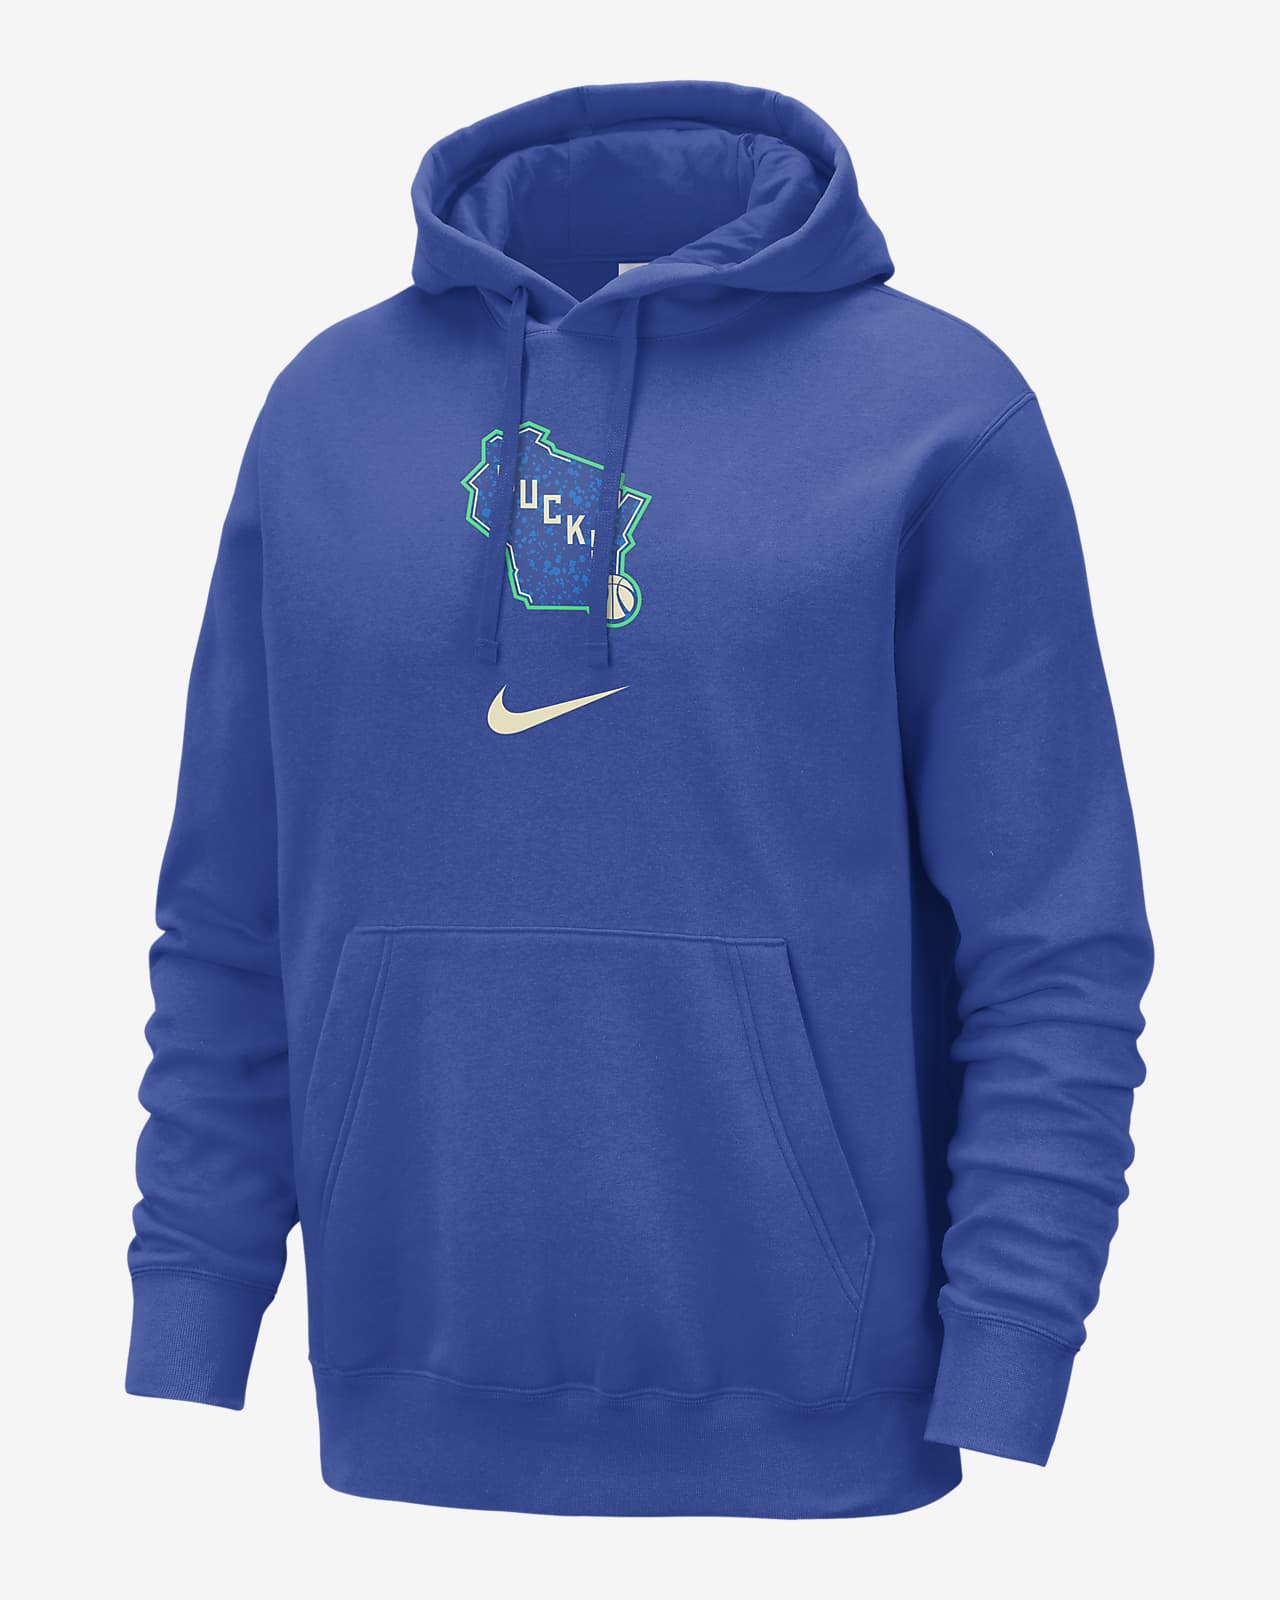 https://static.nike.com/a/images/t_PDP_1280_v1/f_auto,q_auto:eco/2e5e1ed0-64c4-4d3e-918a-37d73c8462bf/milwaukee-bucks-club-fleece-city-edition-mens-nba-pullover-hoodie-4Mt4L4.png